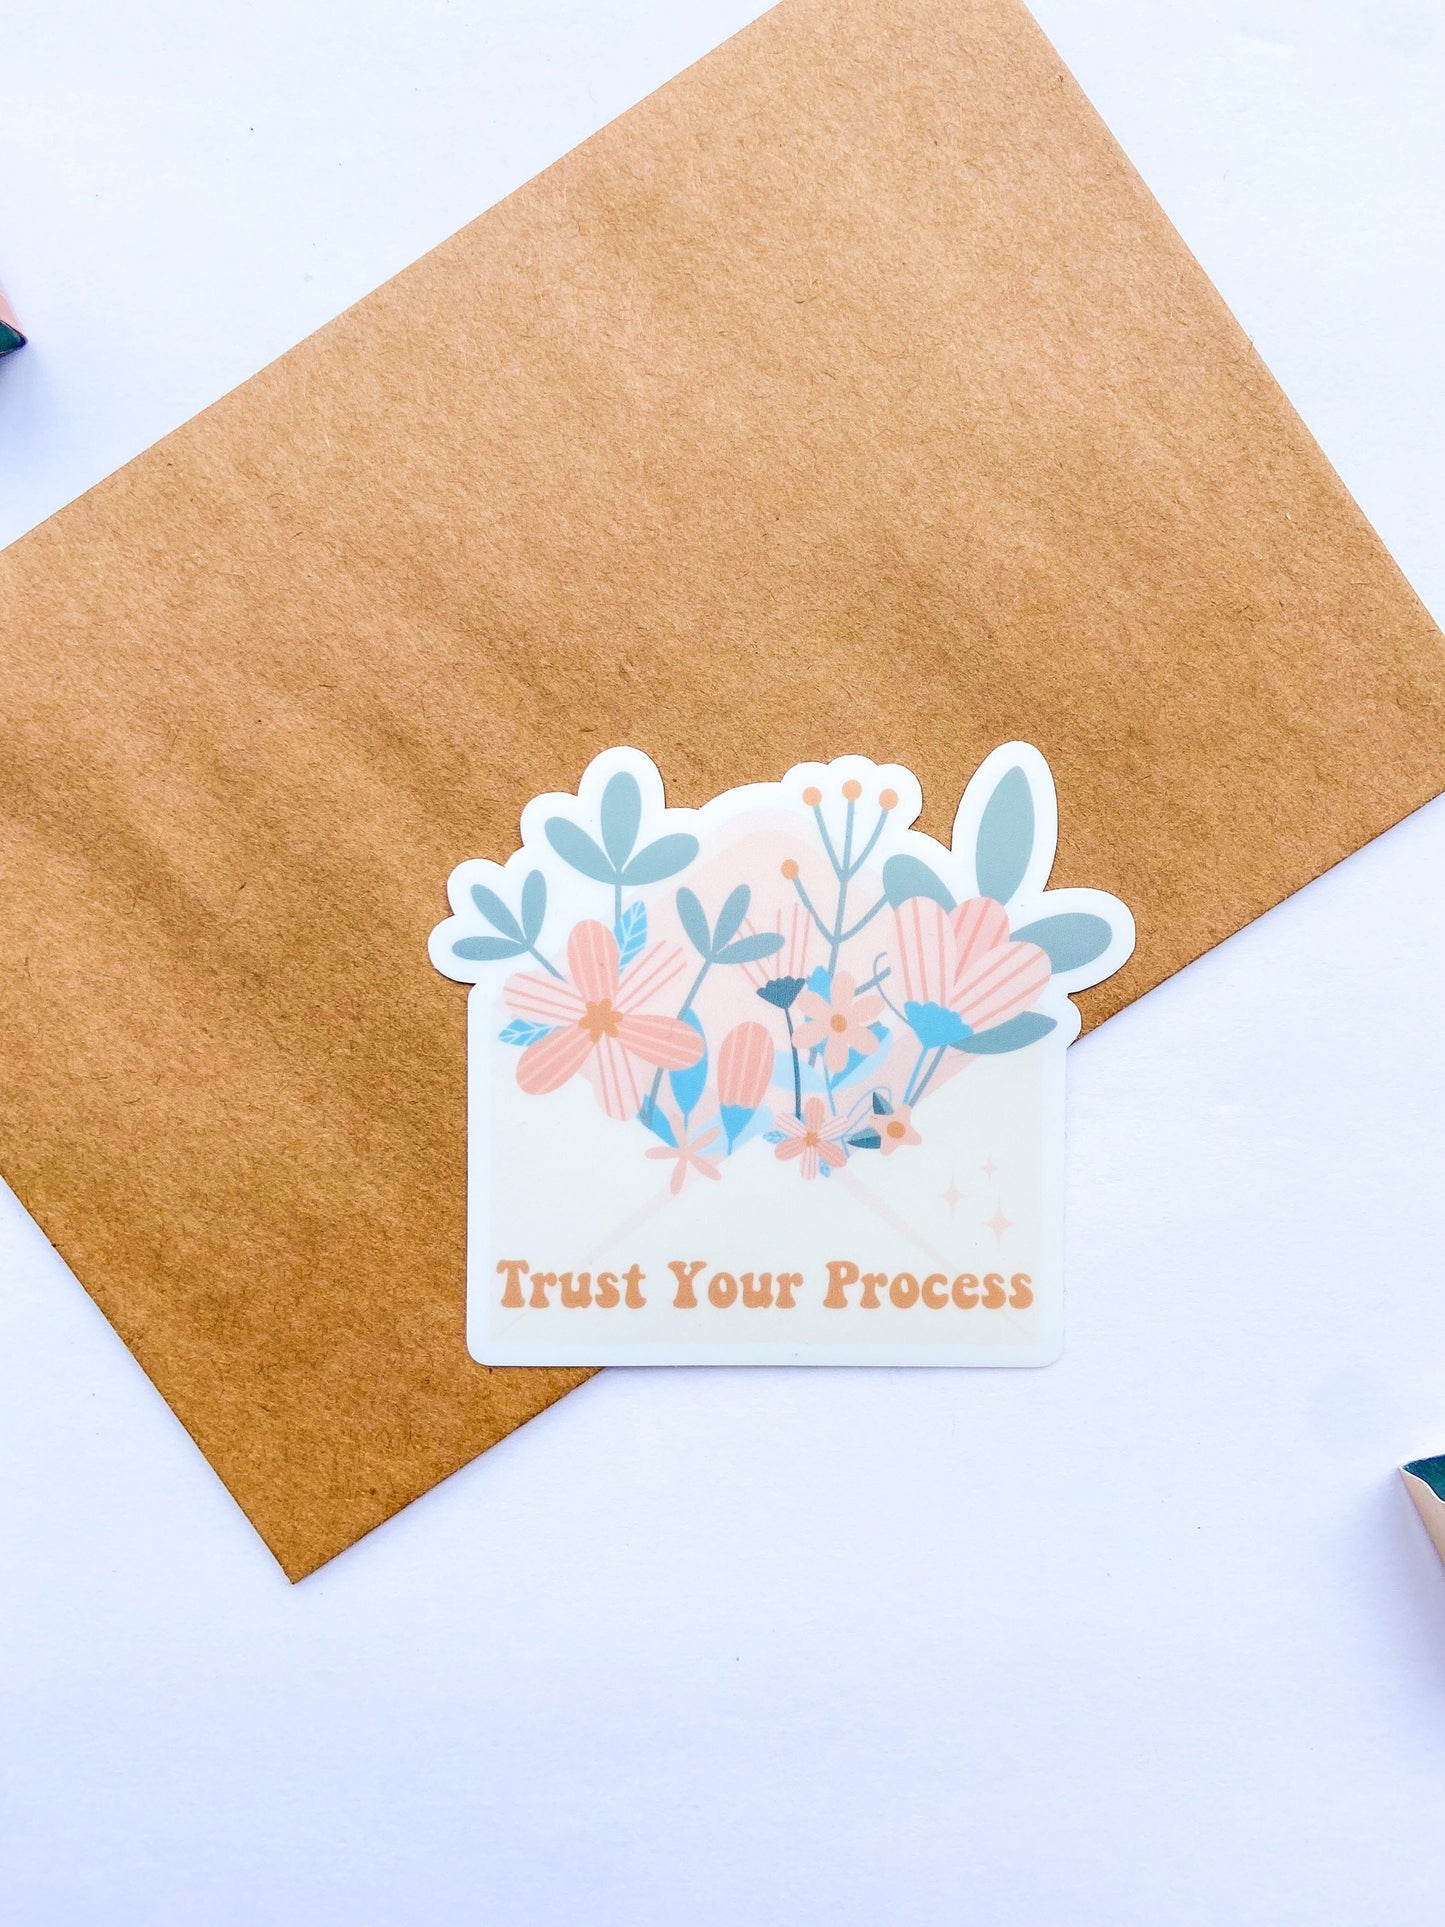 Floral Mental Health Sticker, Trust The Process Sticker, Floral Envelope Sticker, Botanical Sticker, Mental Health Sticker, Vinyl Stickers